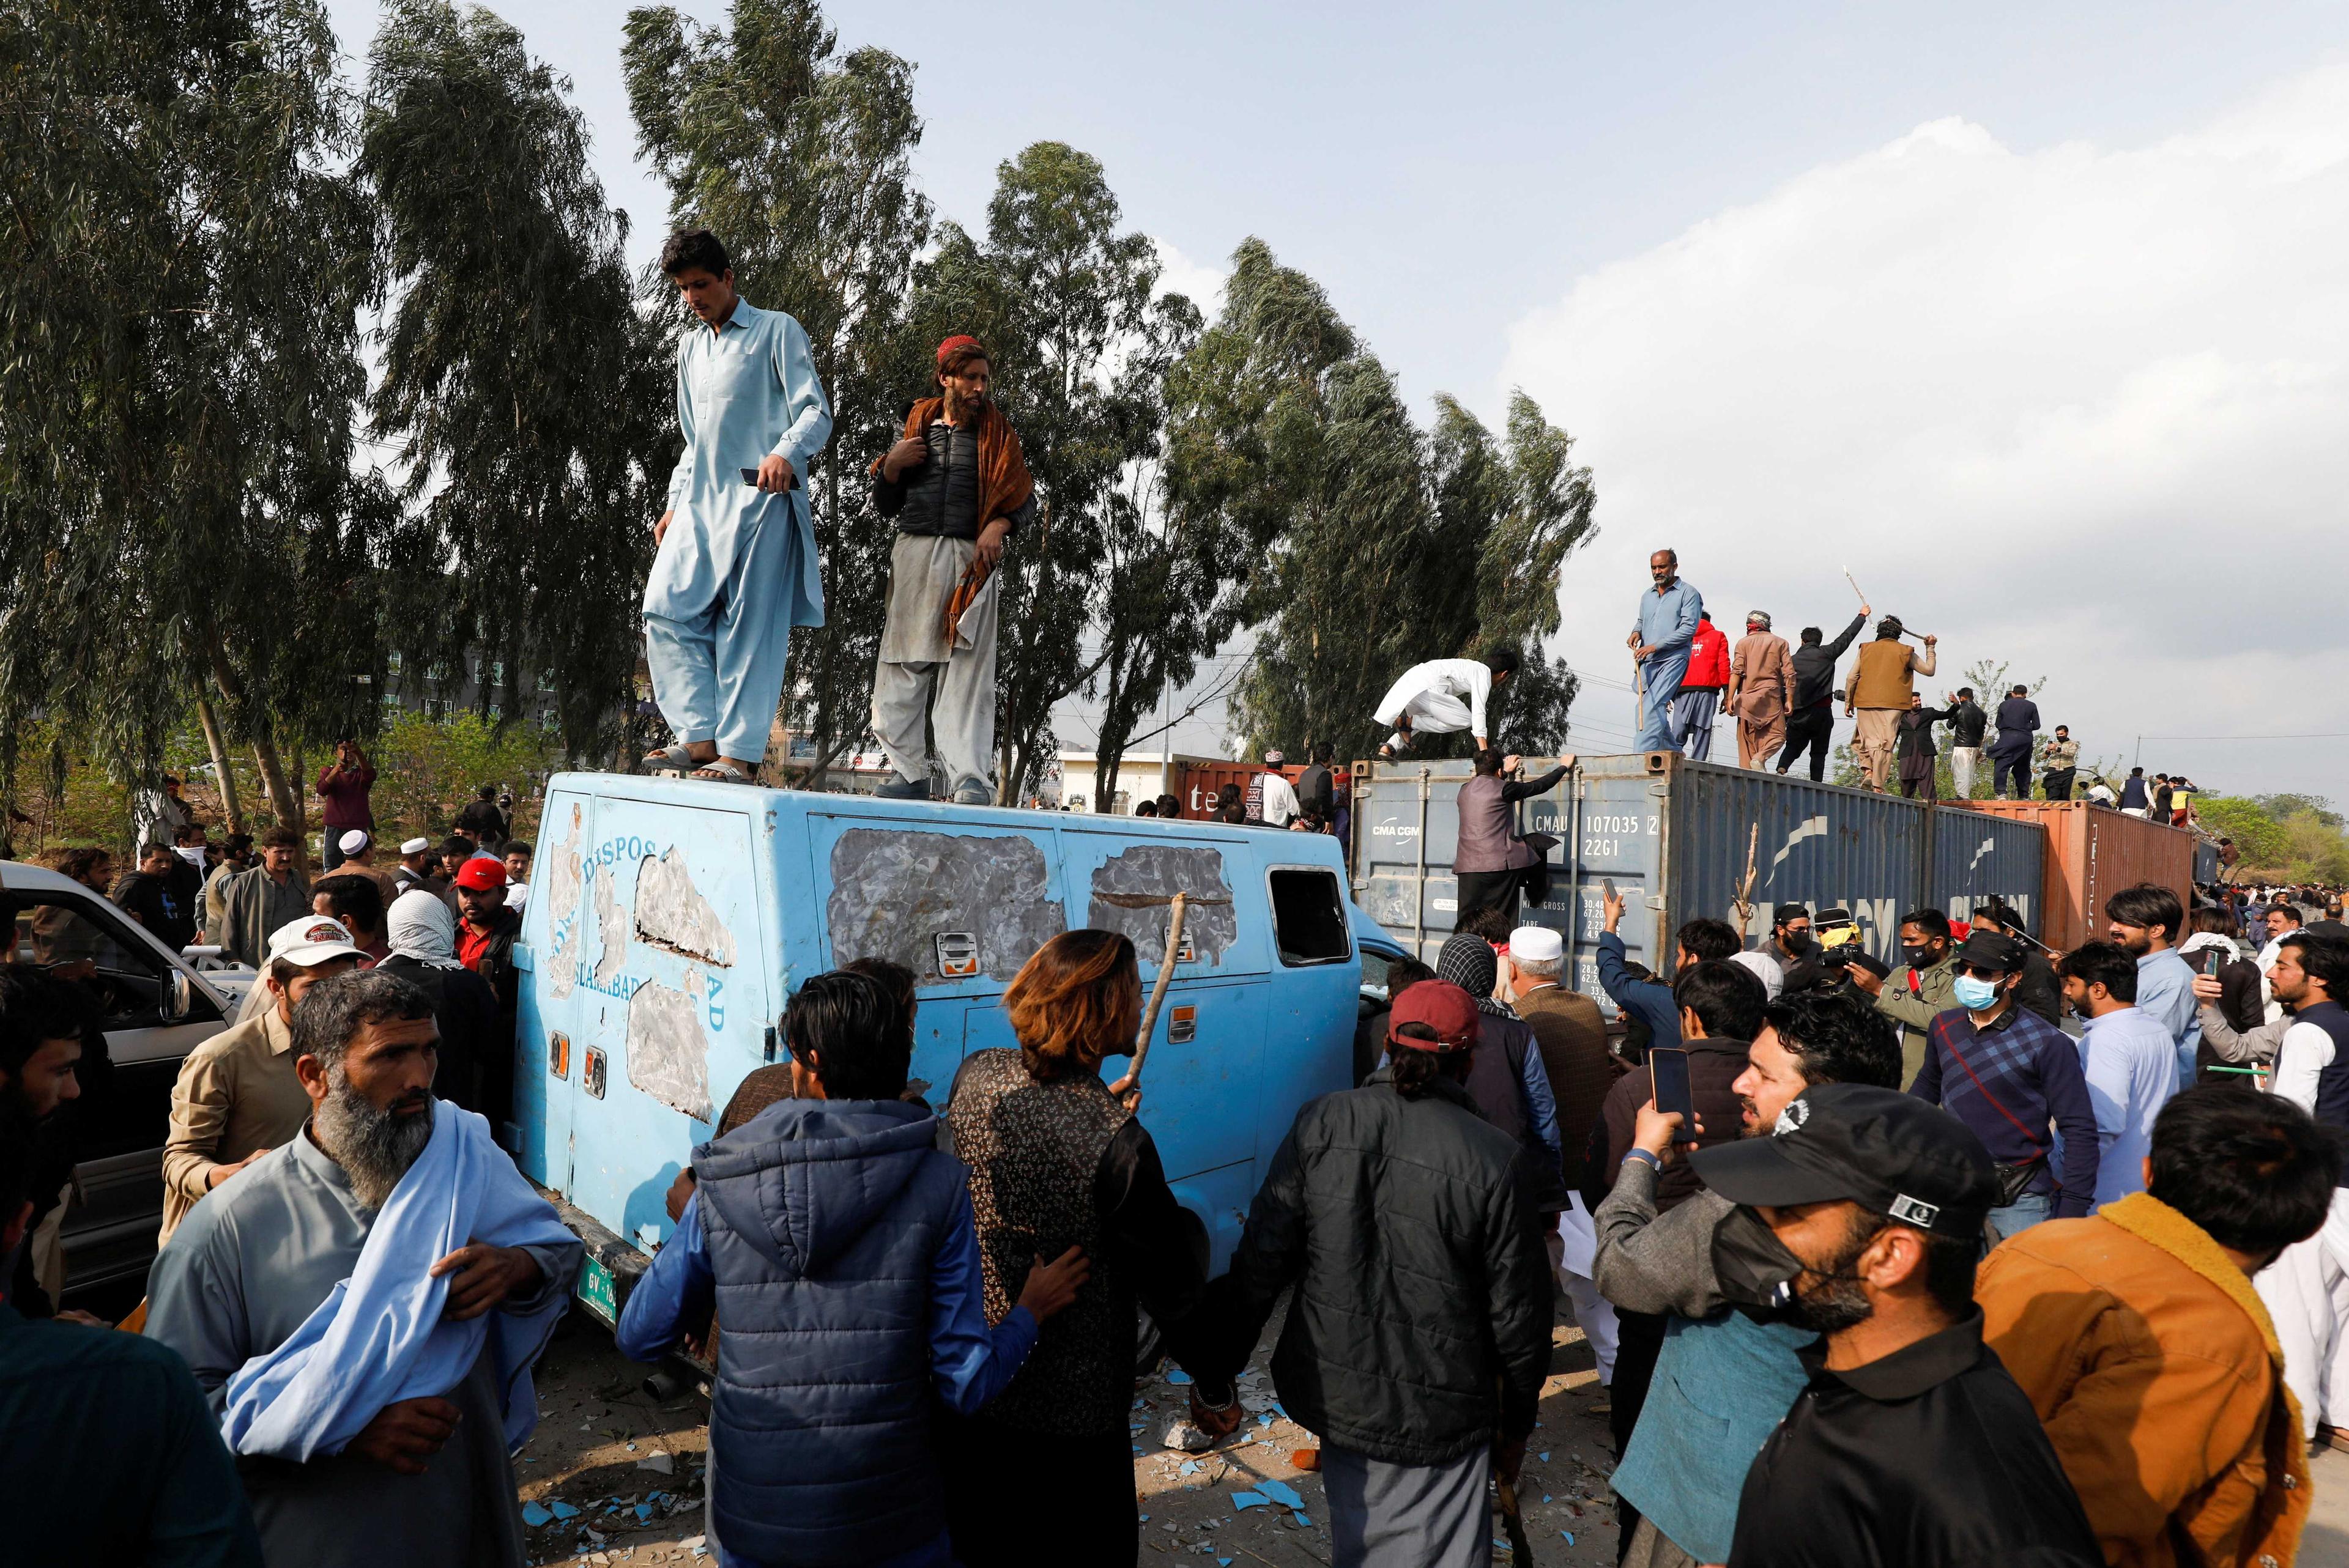 Supporters of former Pakistani Prime Minister Imran Khan climb on shipping containers, placed to block the road, during a clash outside the federal judicial complex in Islamabad, Pakistan March 18. Photo: Reuters